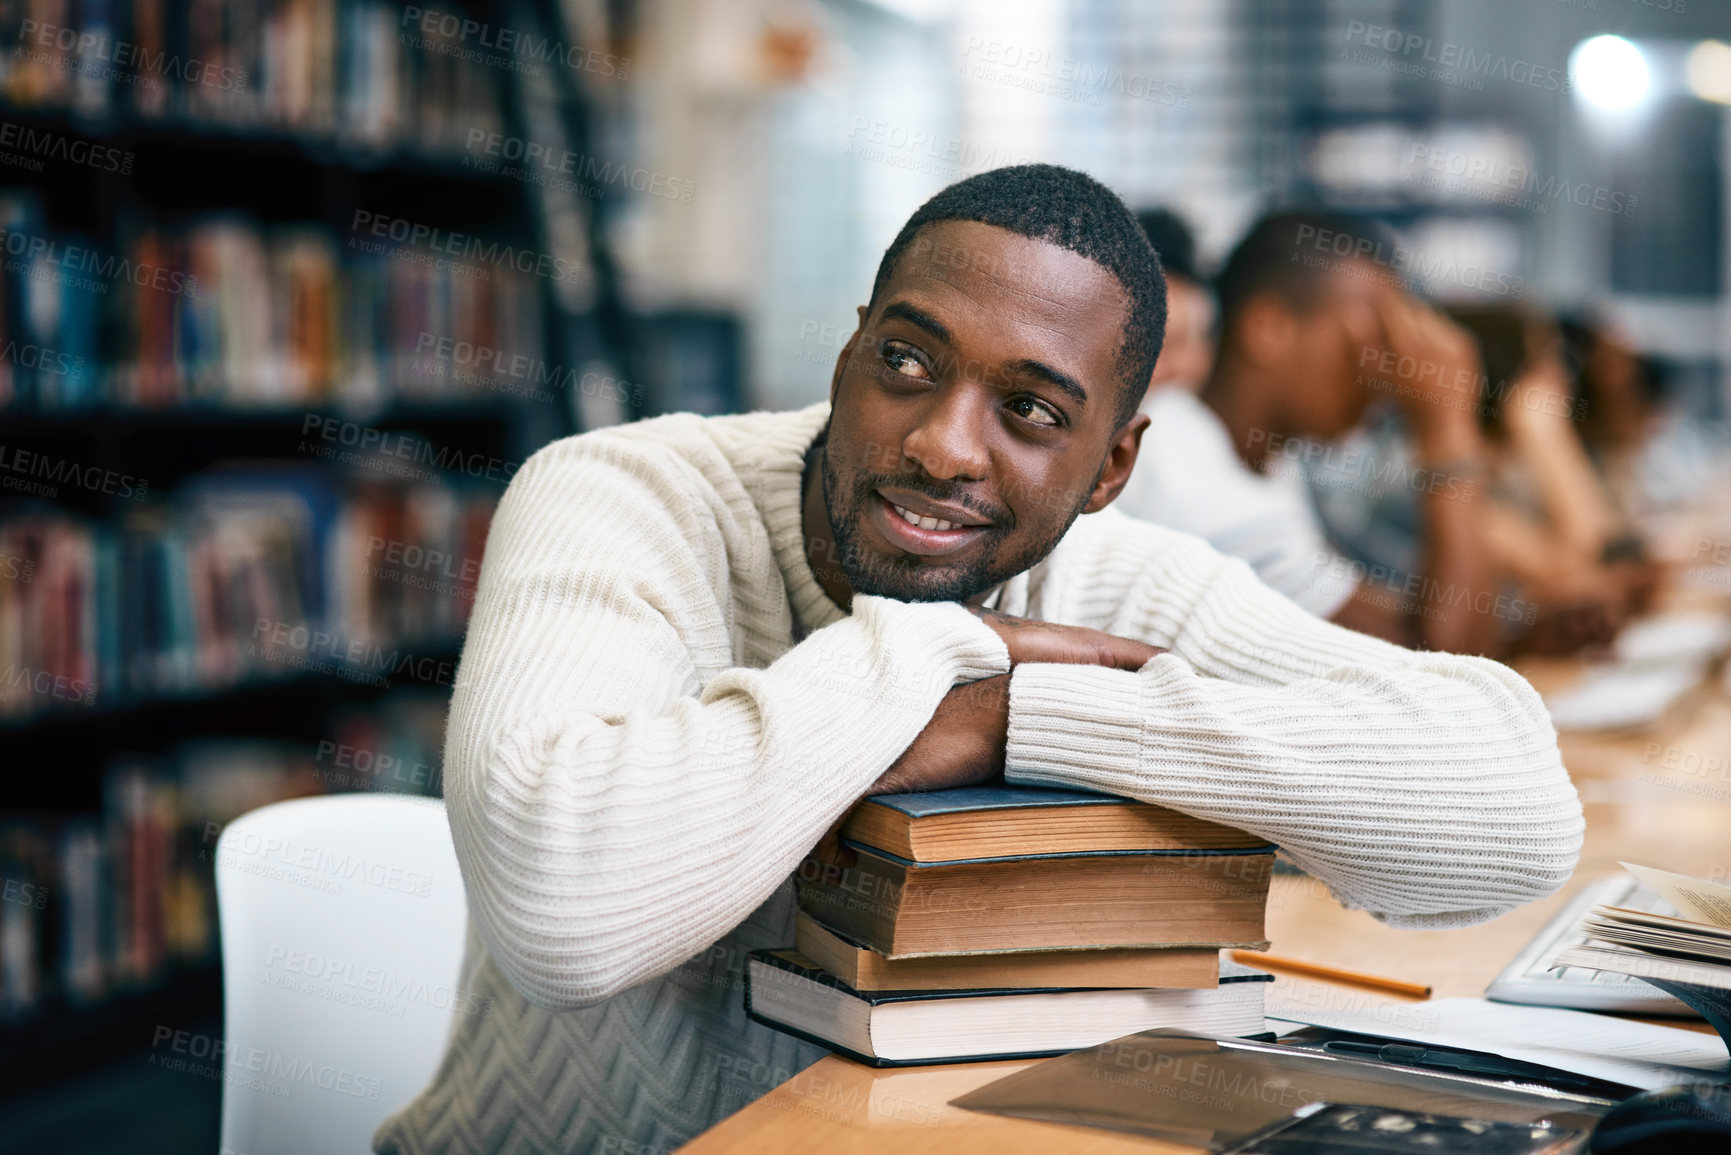 Buy stock photo Shot of a young man resting on a pile of books in a college library and looking thoughtful